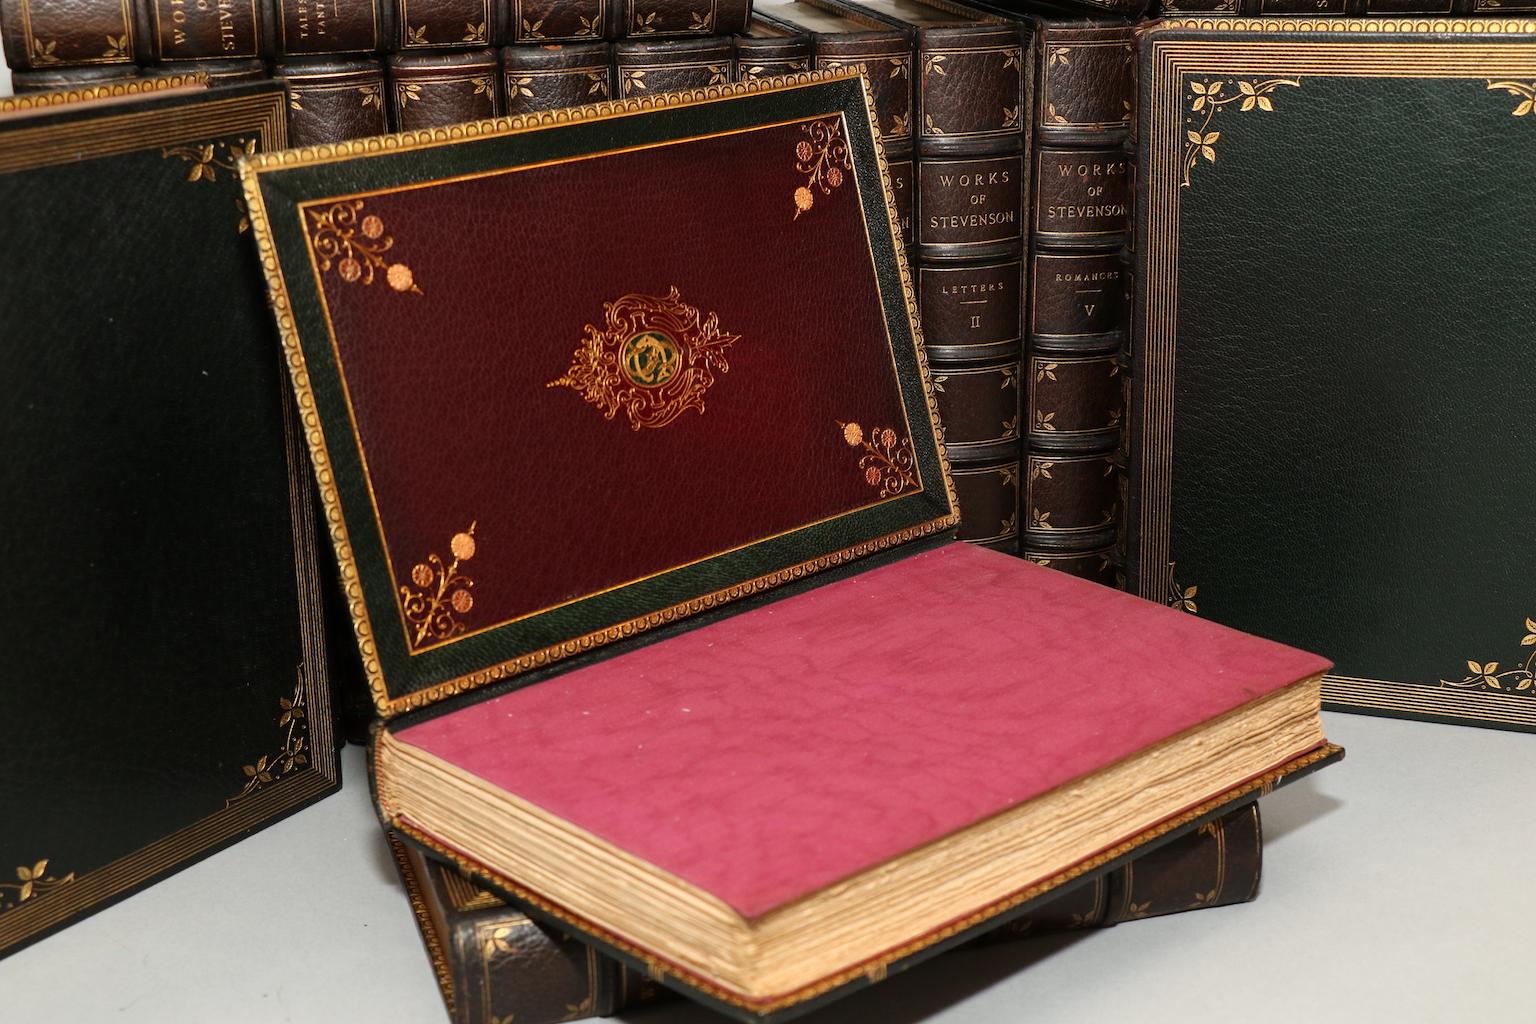 32 volumes. Edinburgh Edition! Bound in full green Morocco with elaborate leather & silk doublunes. By the Monastary Hill Bindery. Top edges gilt with raised bands and gilt on covers and spines. Published in Edinburgh in 1894 by T. & A. Constable